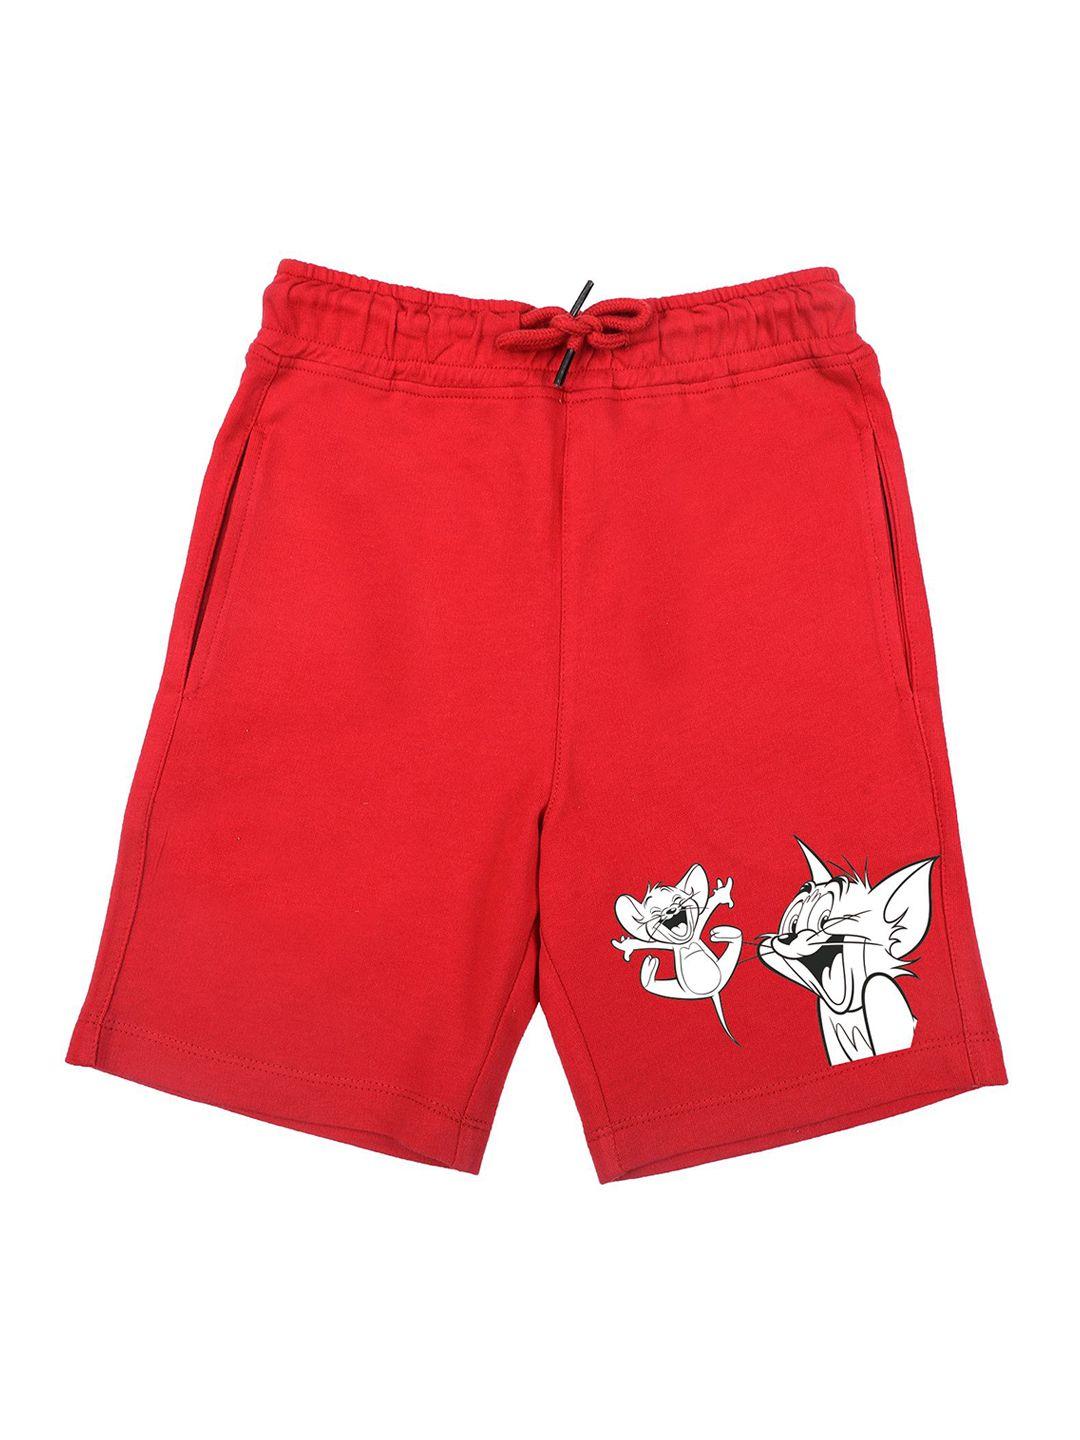 tom & jerry by wear your mind boys red & white tom & jerry printed shorts